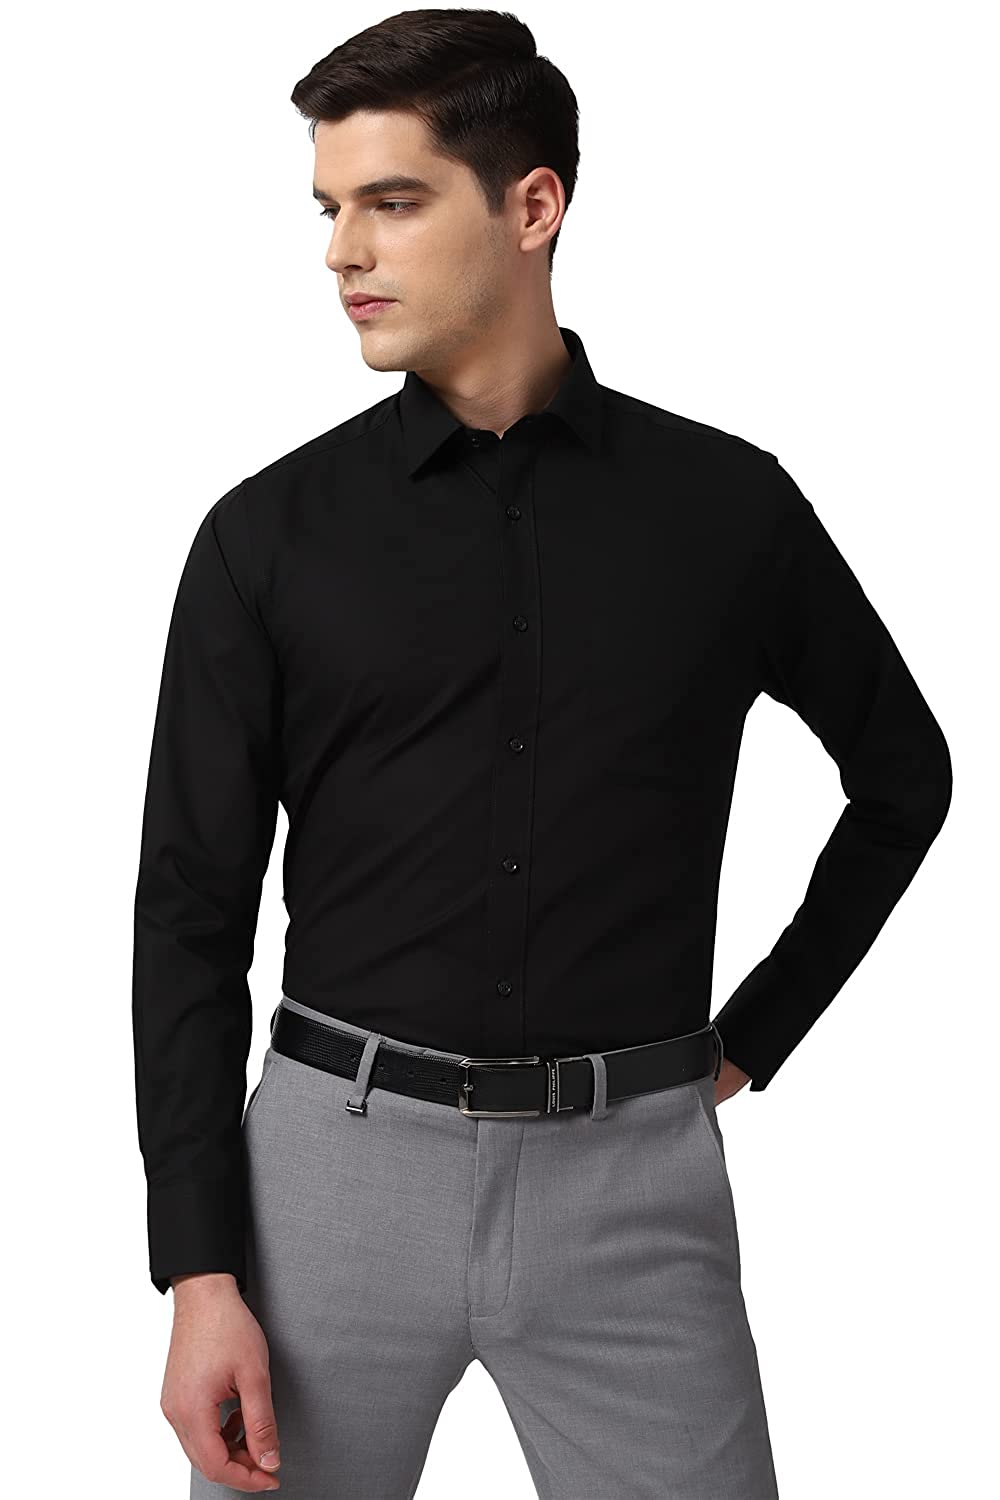 Buy Peter England Formal Black Shirt For MenOtherAnnouncementsAll Indiaother